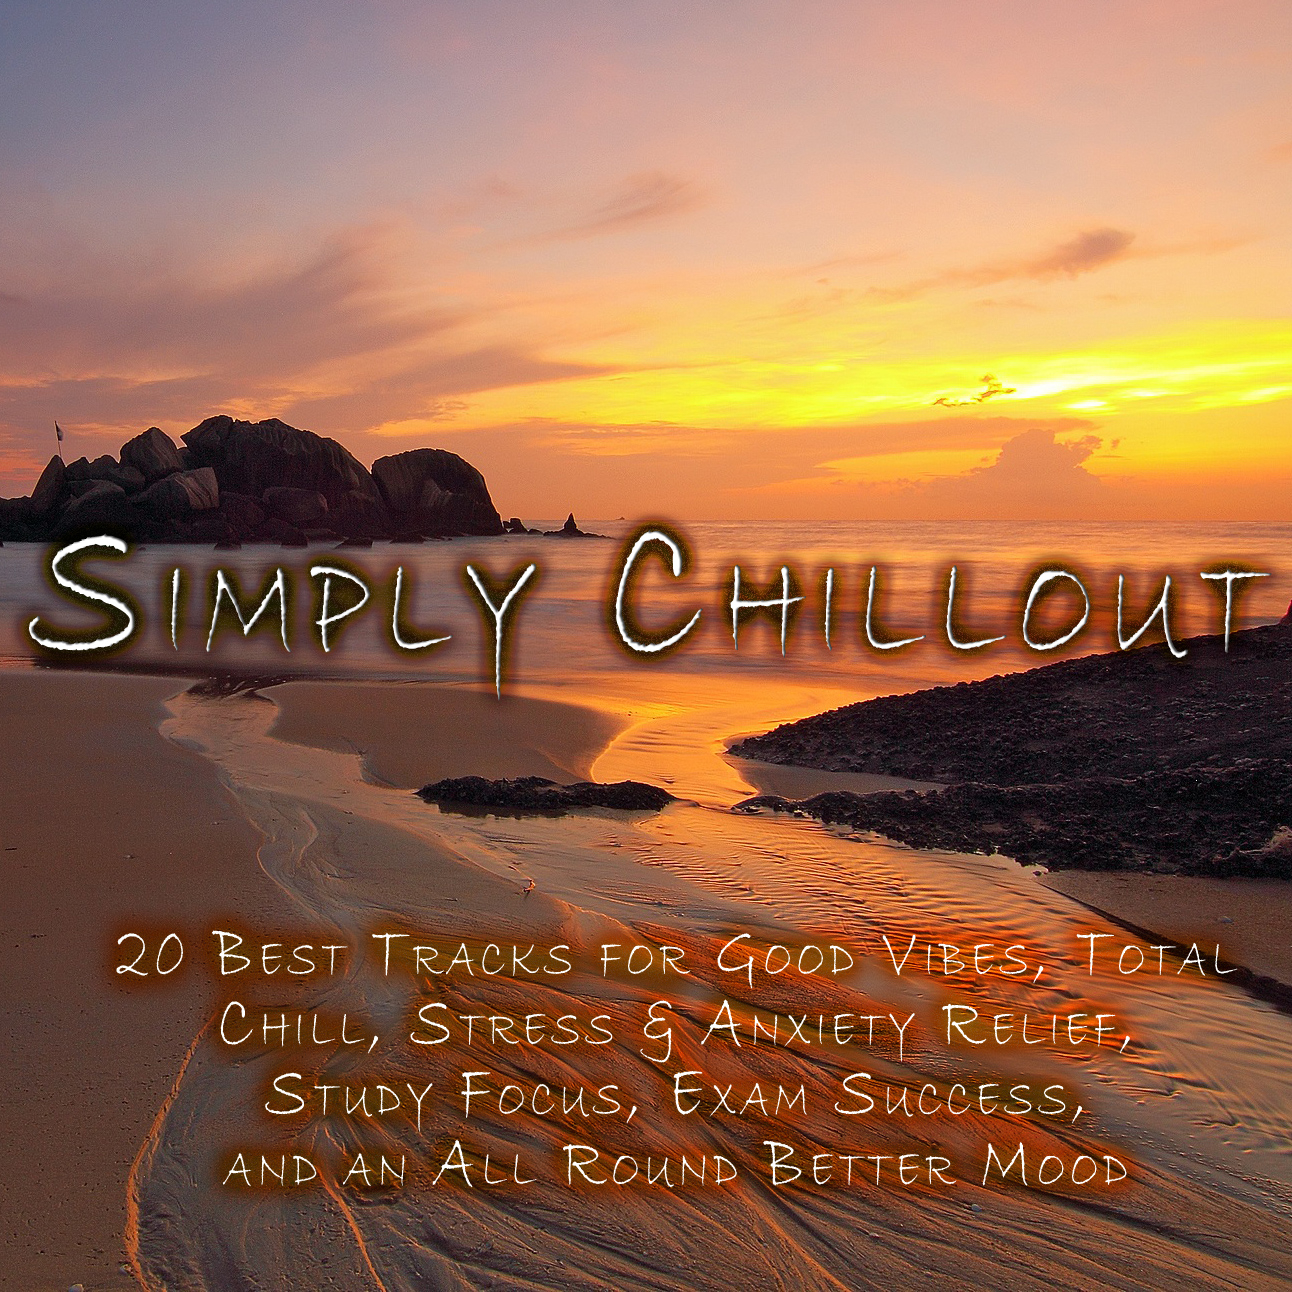 Simply Chillout - 20 Best Tracks for Good Vibes, Total Chill, Stress & Anxiety Relief, Study Focus, Exam Success, and an All Round Better Mood